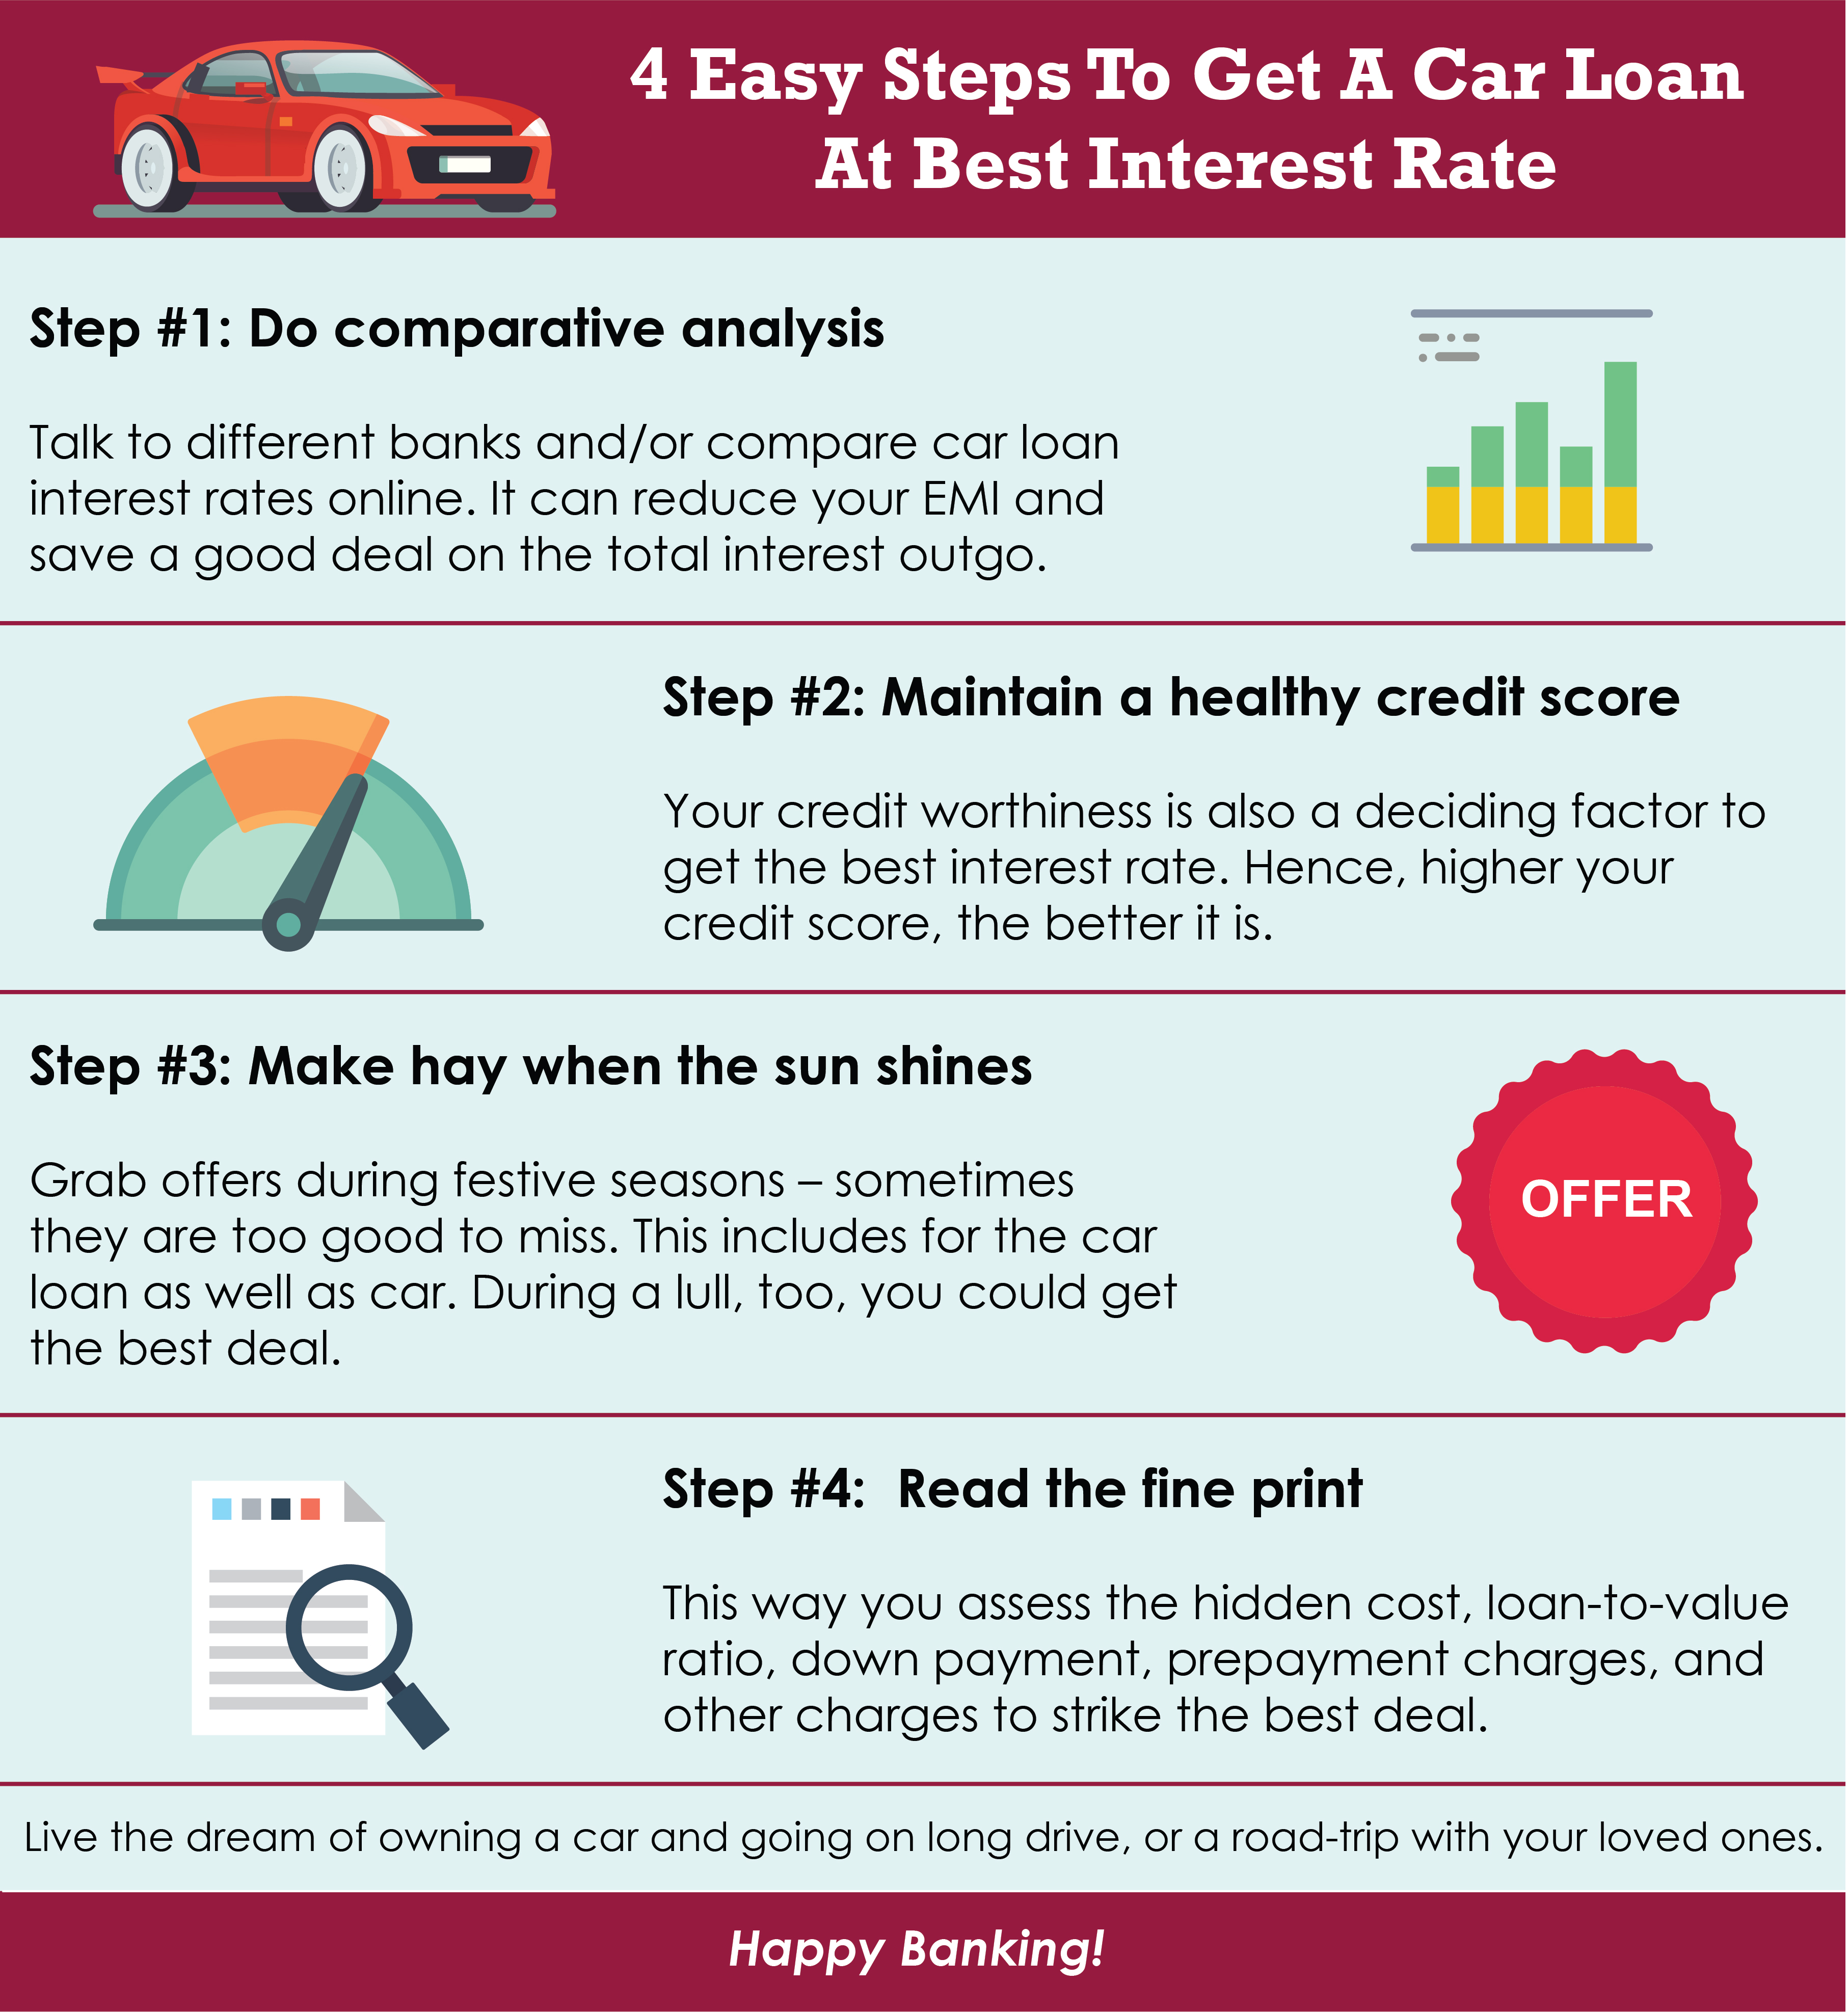 4 easy steps to get a car loan at best interest rates